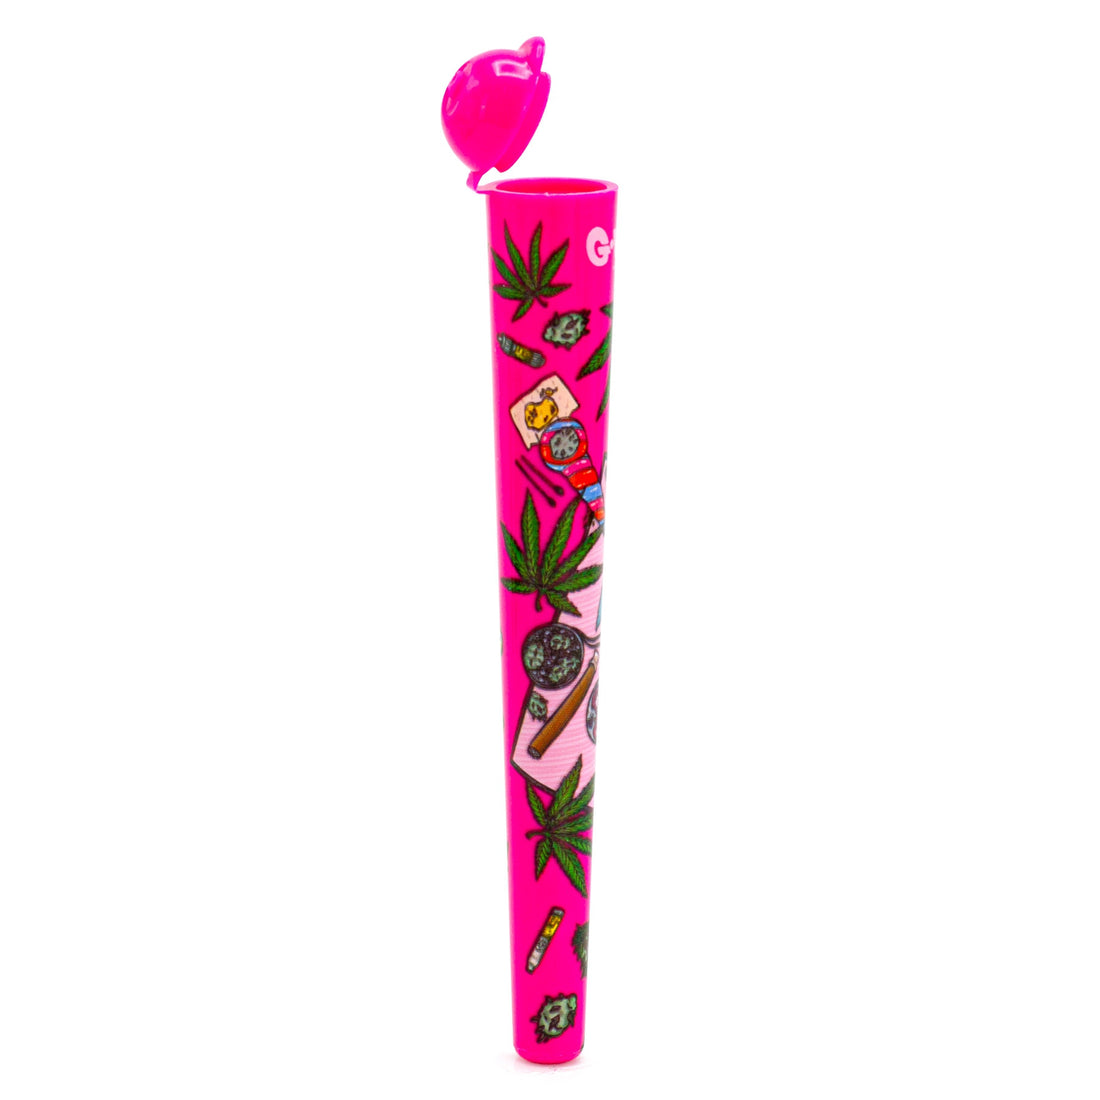 G-Rollz Cone Tube Pink